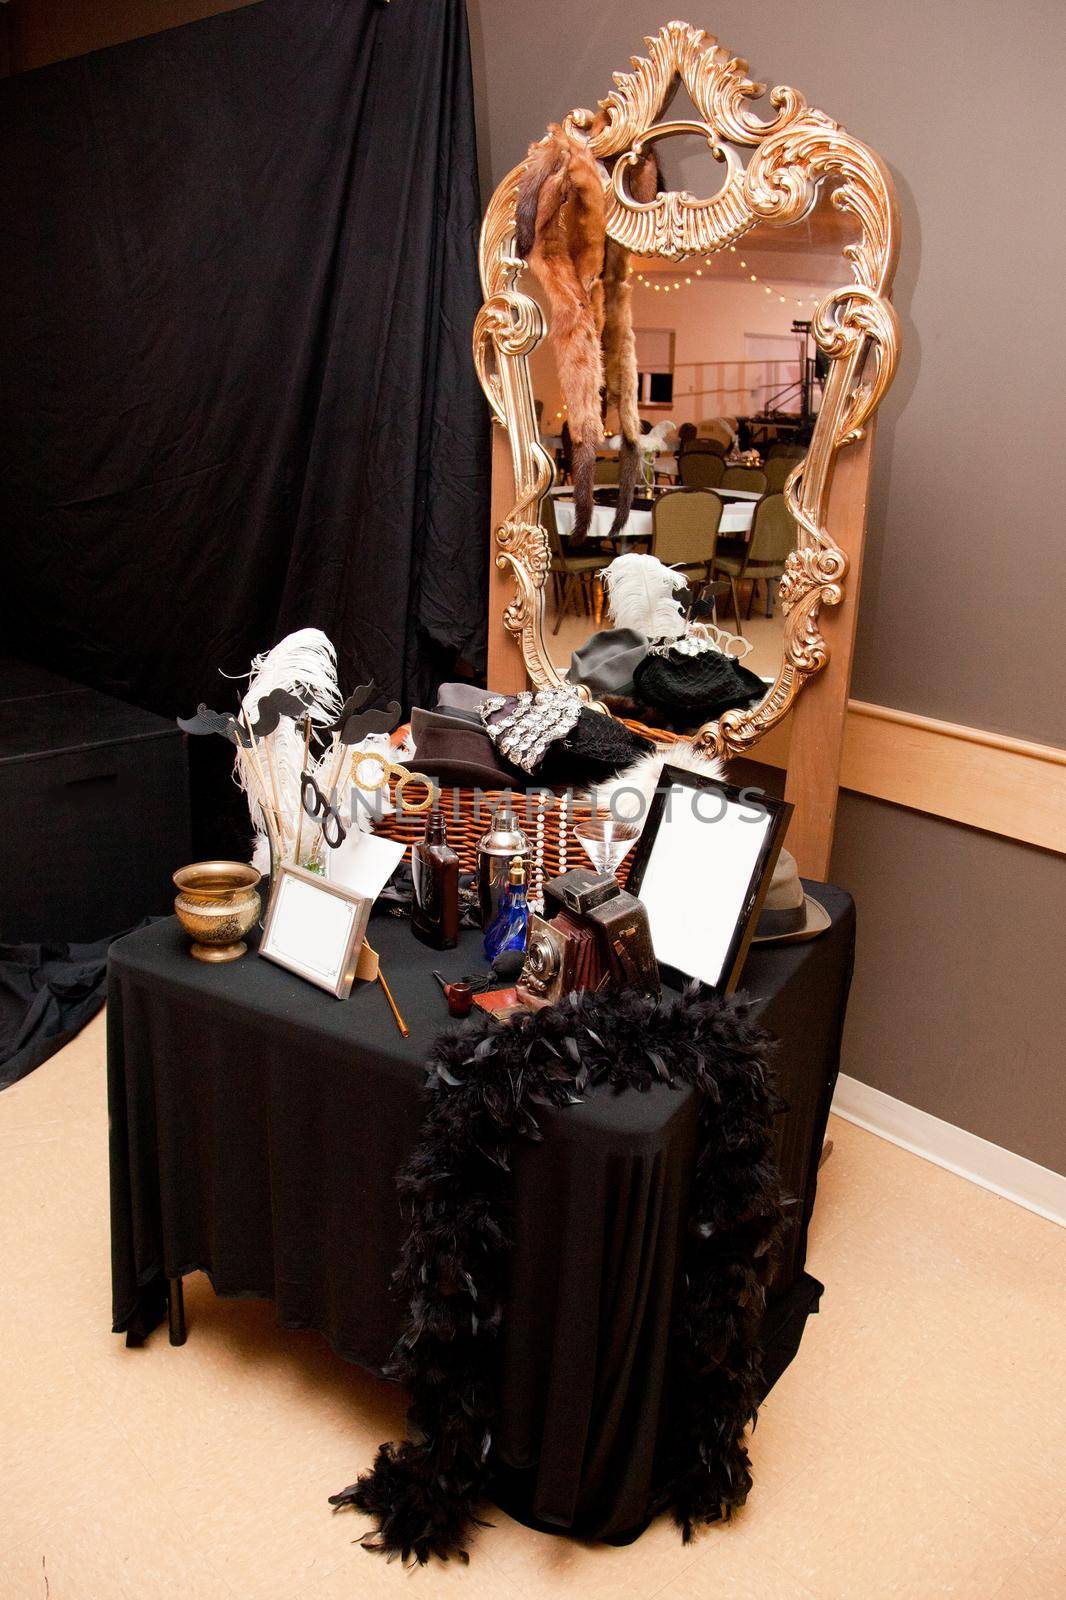 Gold mirror with photobooth props from the 1920s including feather boas, an old camera and hats 